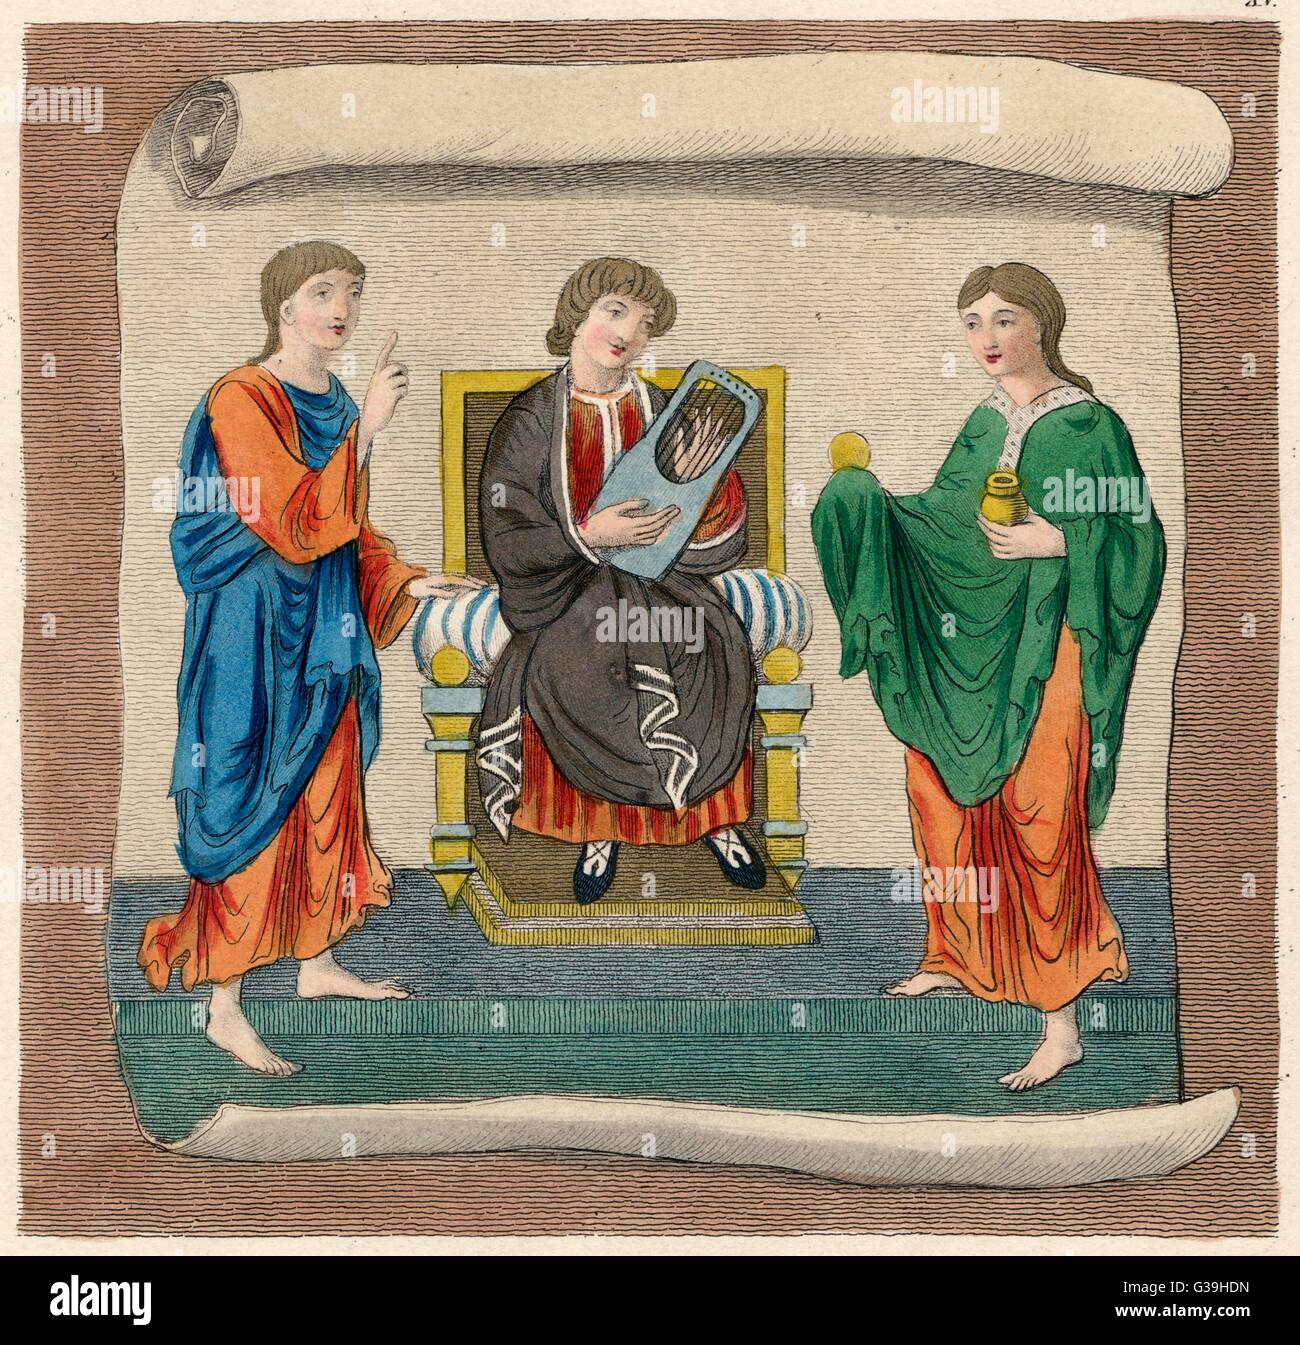 Ecclesiastical habits, priests singing and  making music        Date: 8th century Stock Photo